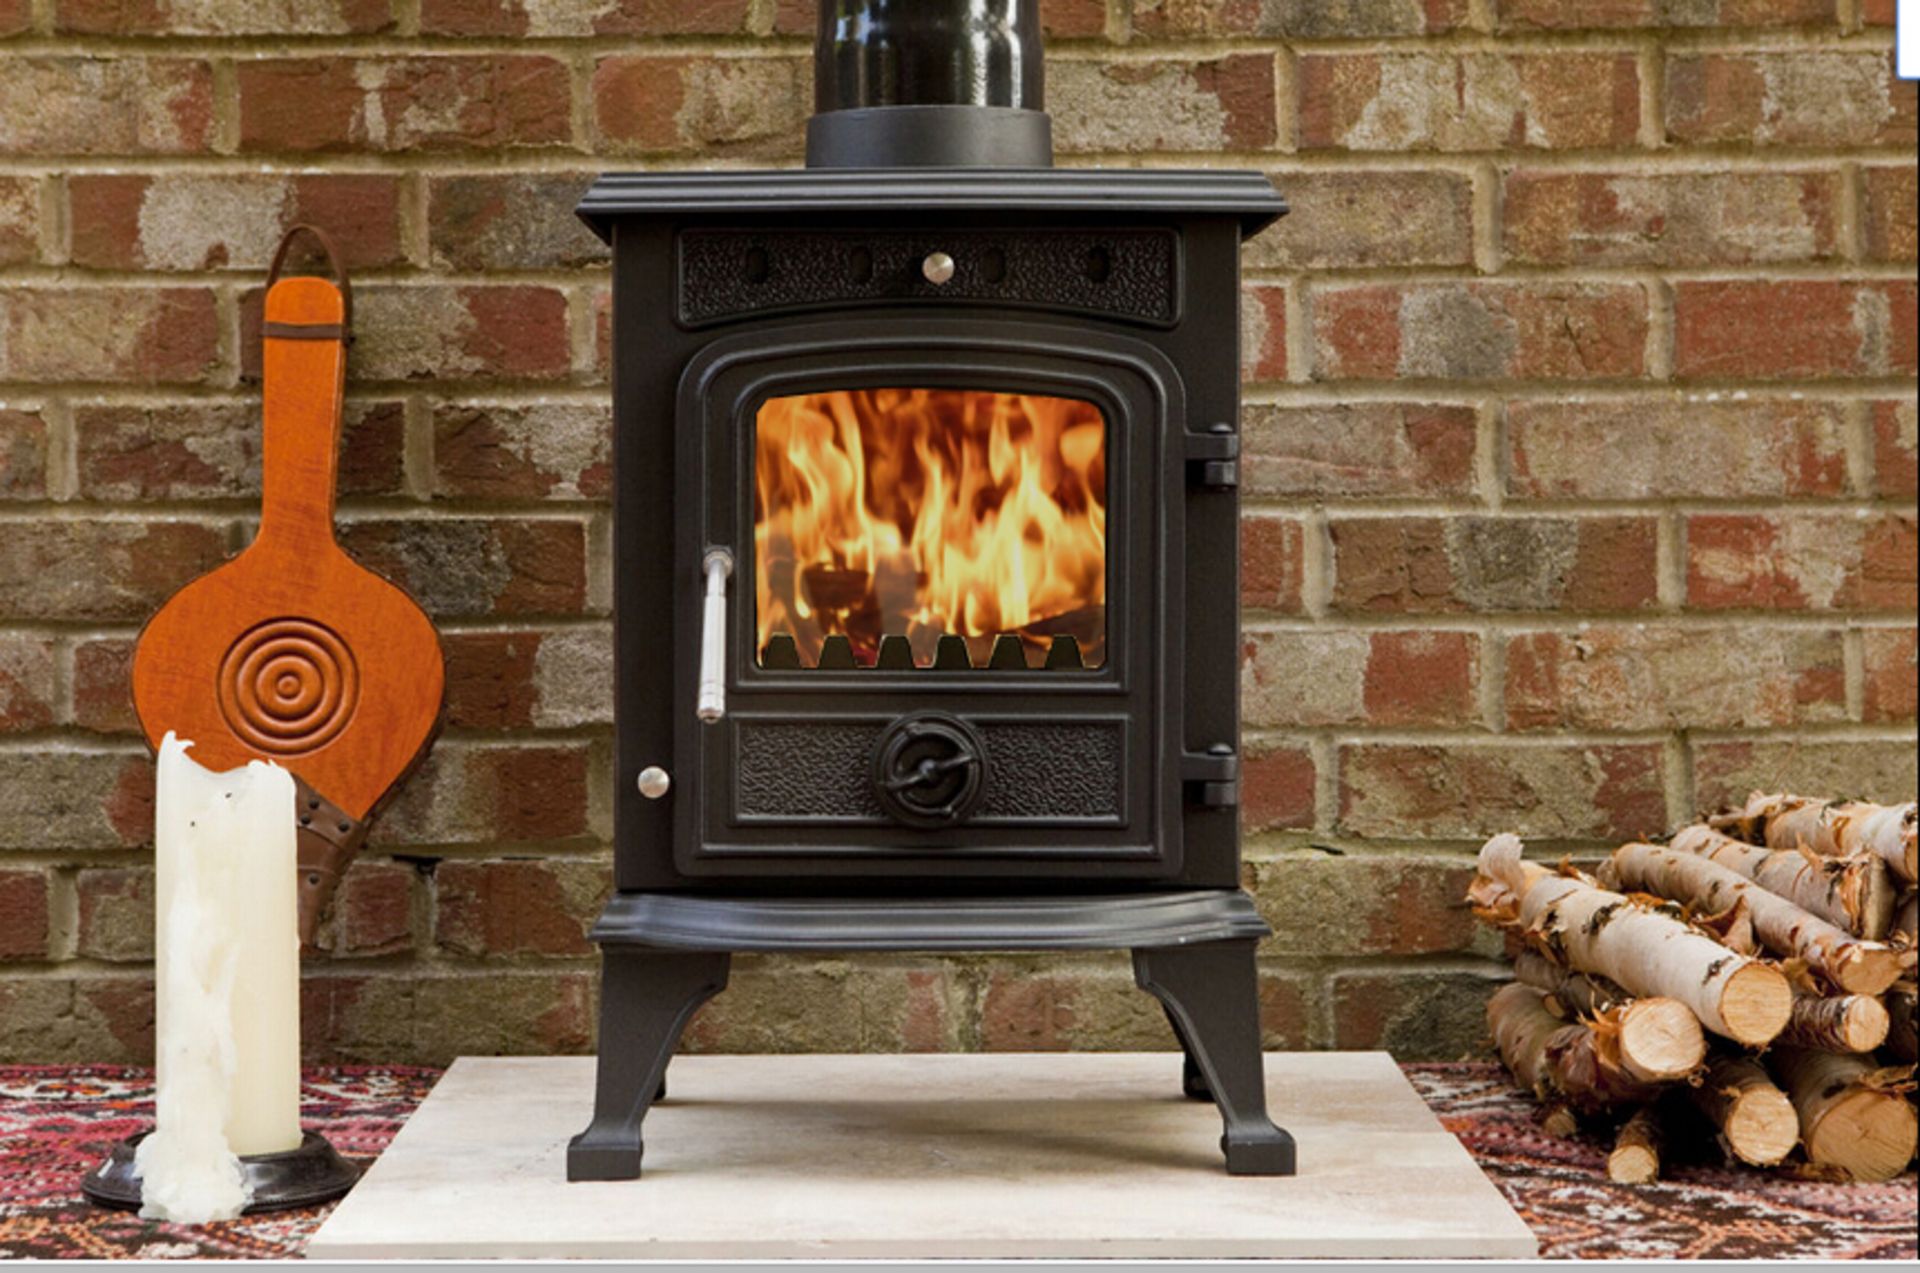 6KW BRAND NEW CRATED CAST IRON MULTI FUEL WOOD BURNING STOVE